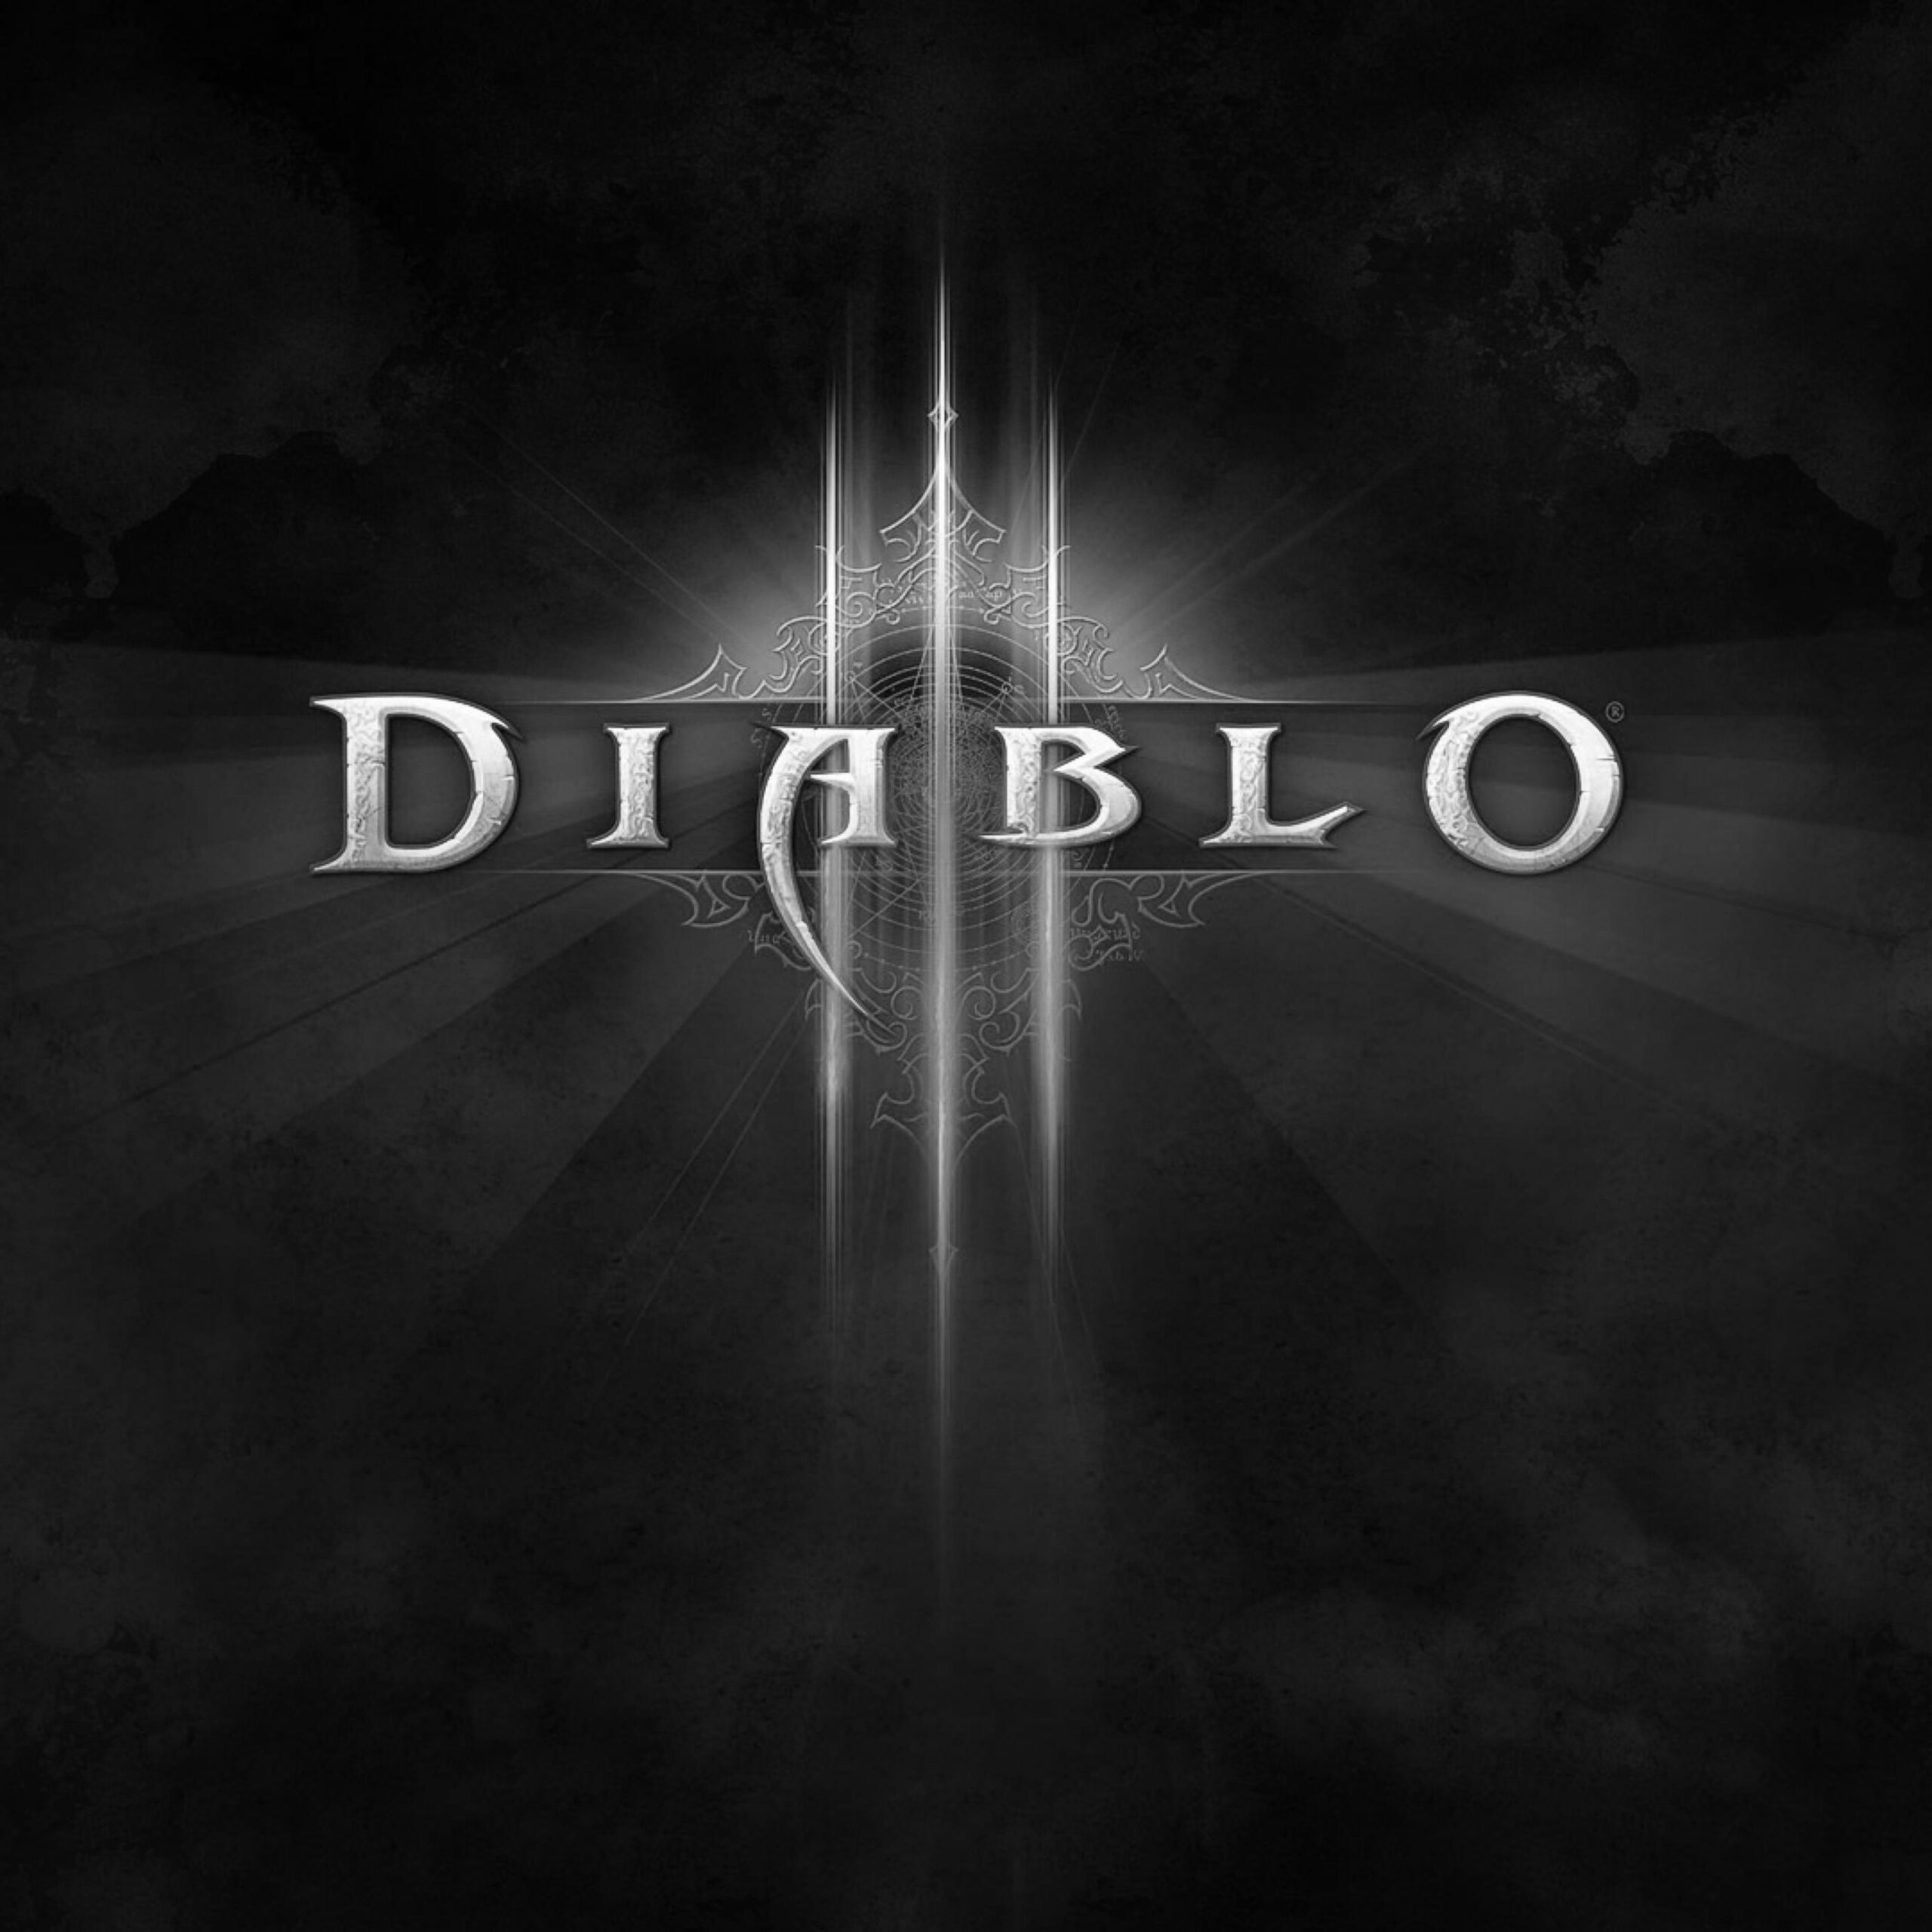 Download Diablo, Name, Black And White Apple iPad Air wallpapers